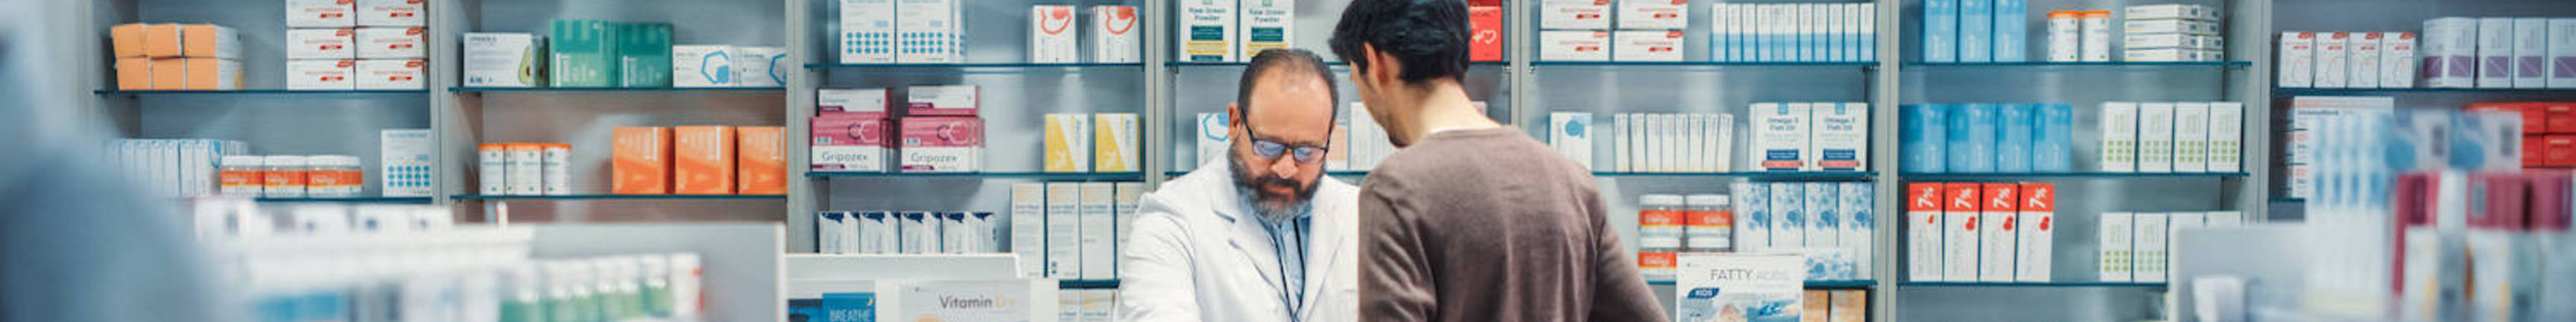 Pharmacy Drugstore Checkout Cashier Counter: Senior Male Pharmacist Scans Barcode and Handsome Young Man Talks to a Cashier and Pays for the Health Care Products at the Checkout Counter.